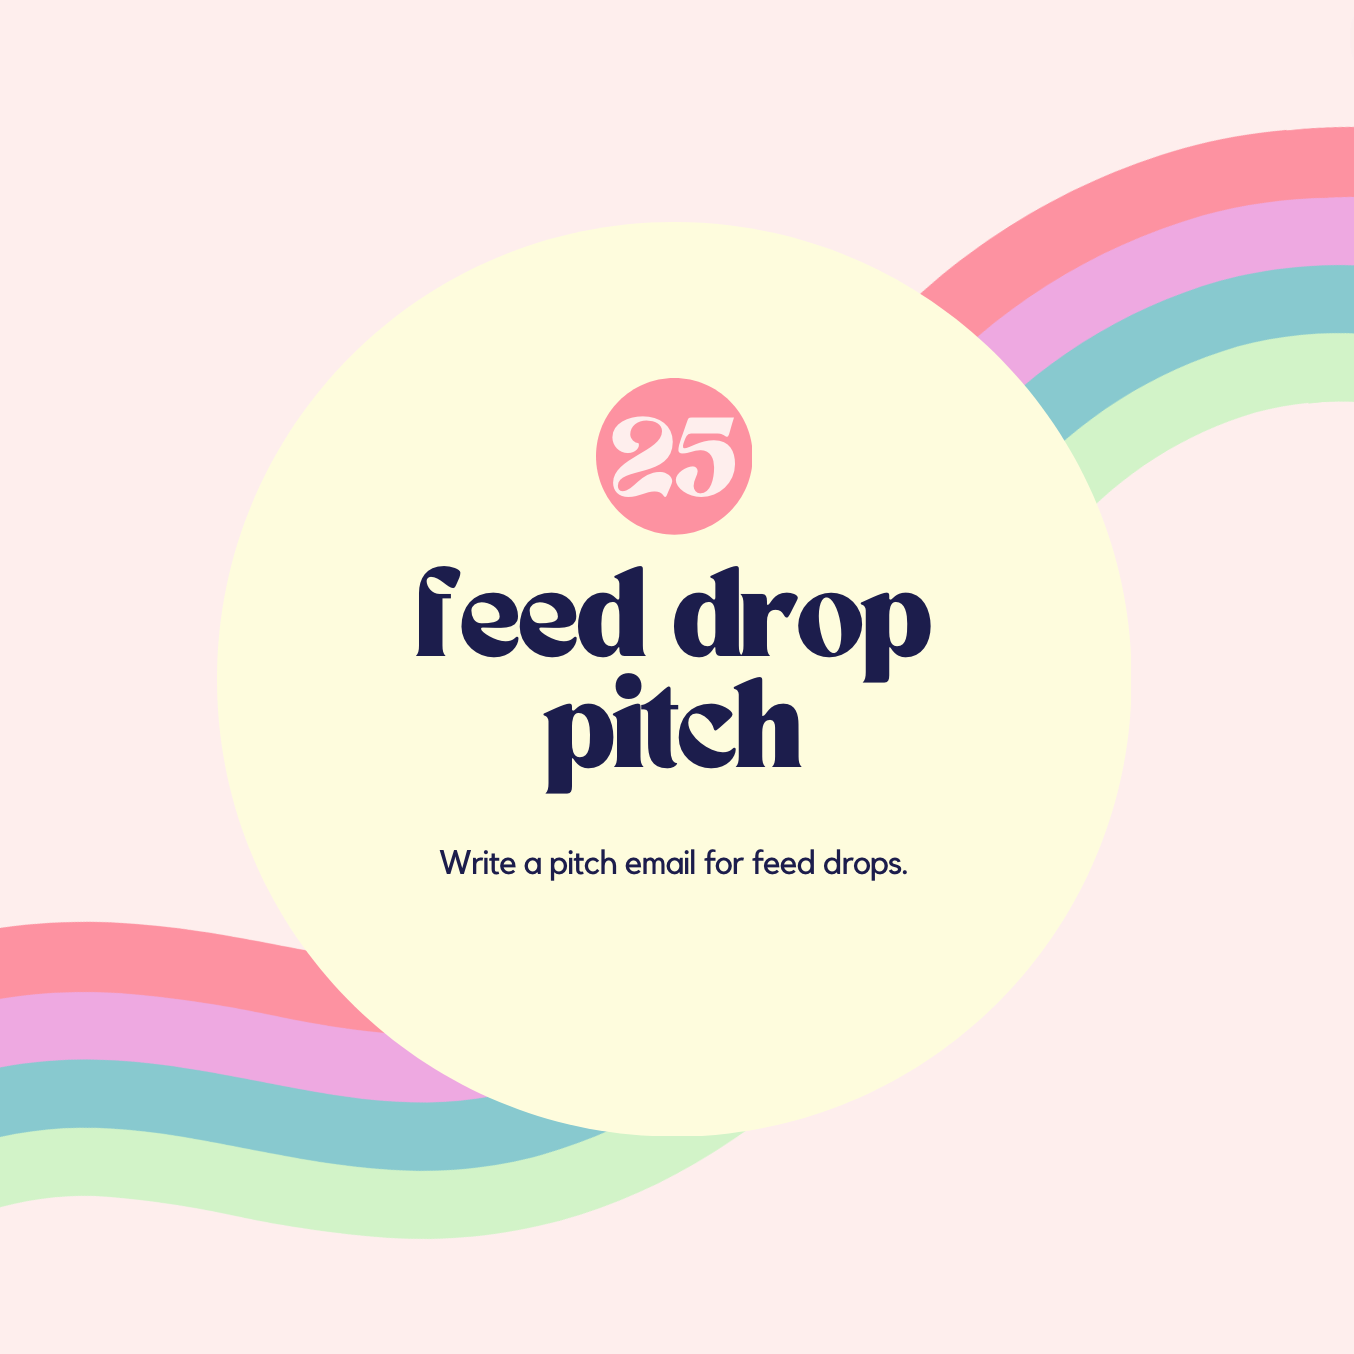 #25 Feed drop pitch. Write a pitch to email for feed drops.